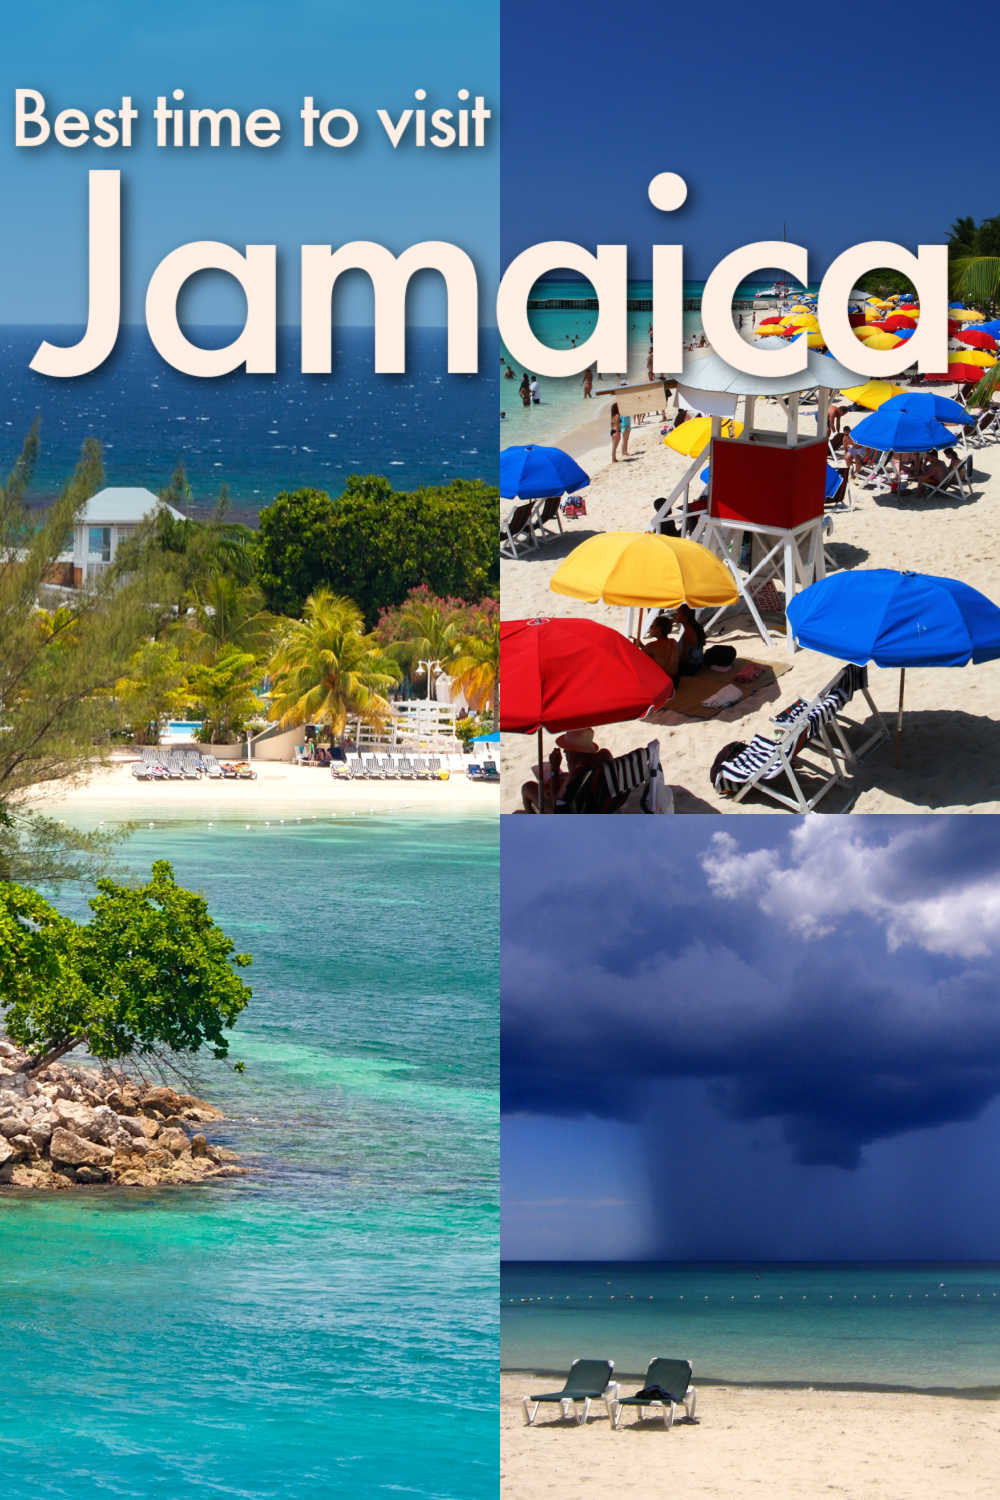 The ultimate guide to the Jamaica travel seasons. A comprehensive guide with Jamaica weather, the monthly temperature in the major cities and resort areas. Plus, when are the rainy and dry seasons in Jamaica, the pros and cons of traveling to Jamaica during peak season, low season, and hurricane season.Everything you need to know to discover the best time to visit Jamaica is here.#Jamaica #Jamaicaweather #besttimetovisitJamaica #Jamaicatravel #Jamaicaholiday